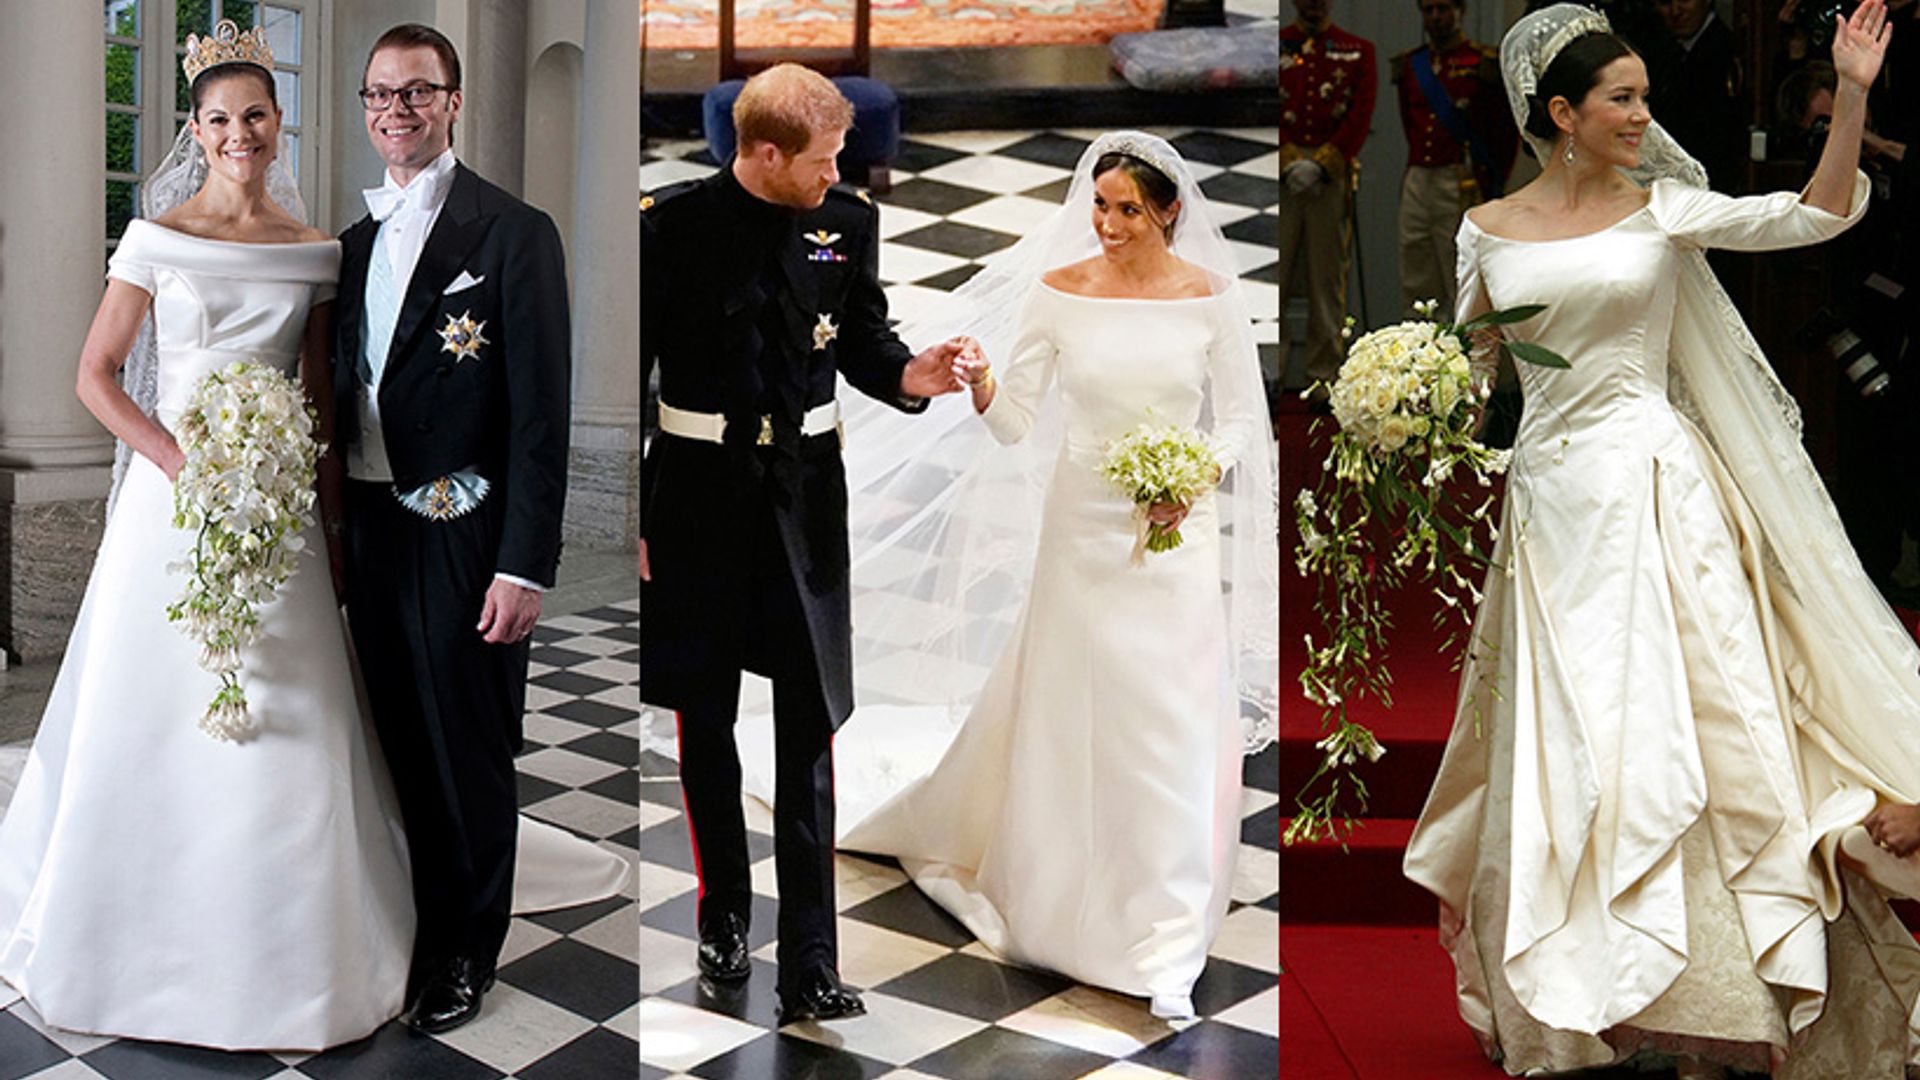 Was Meghan Markle's wedding dress inspired by other royal princesses?